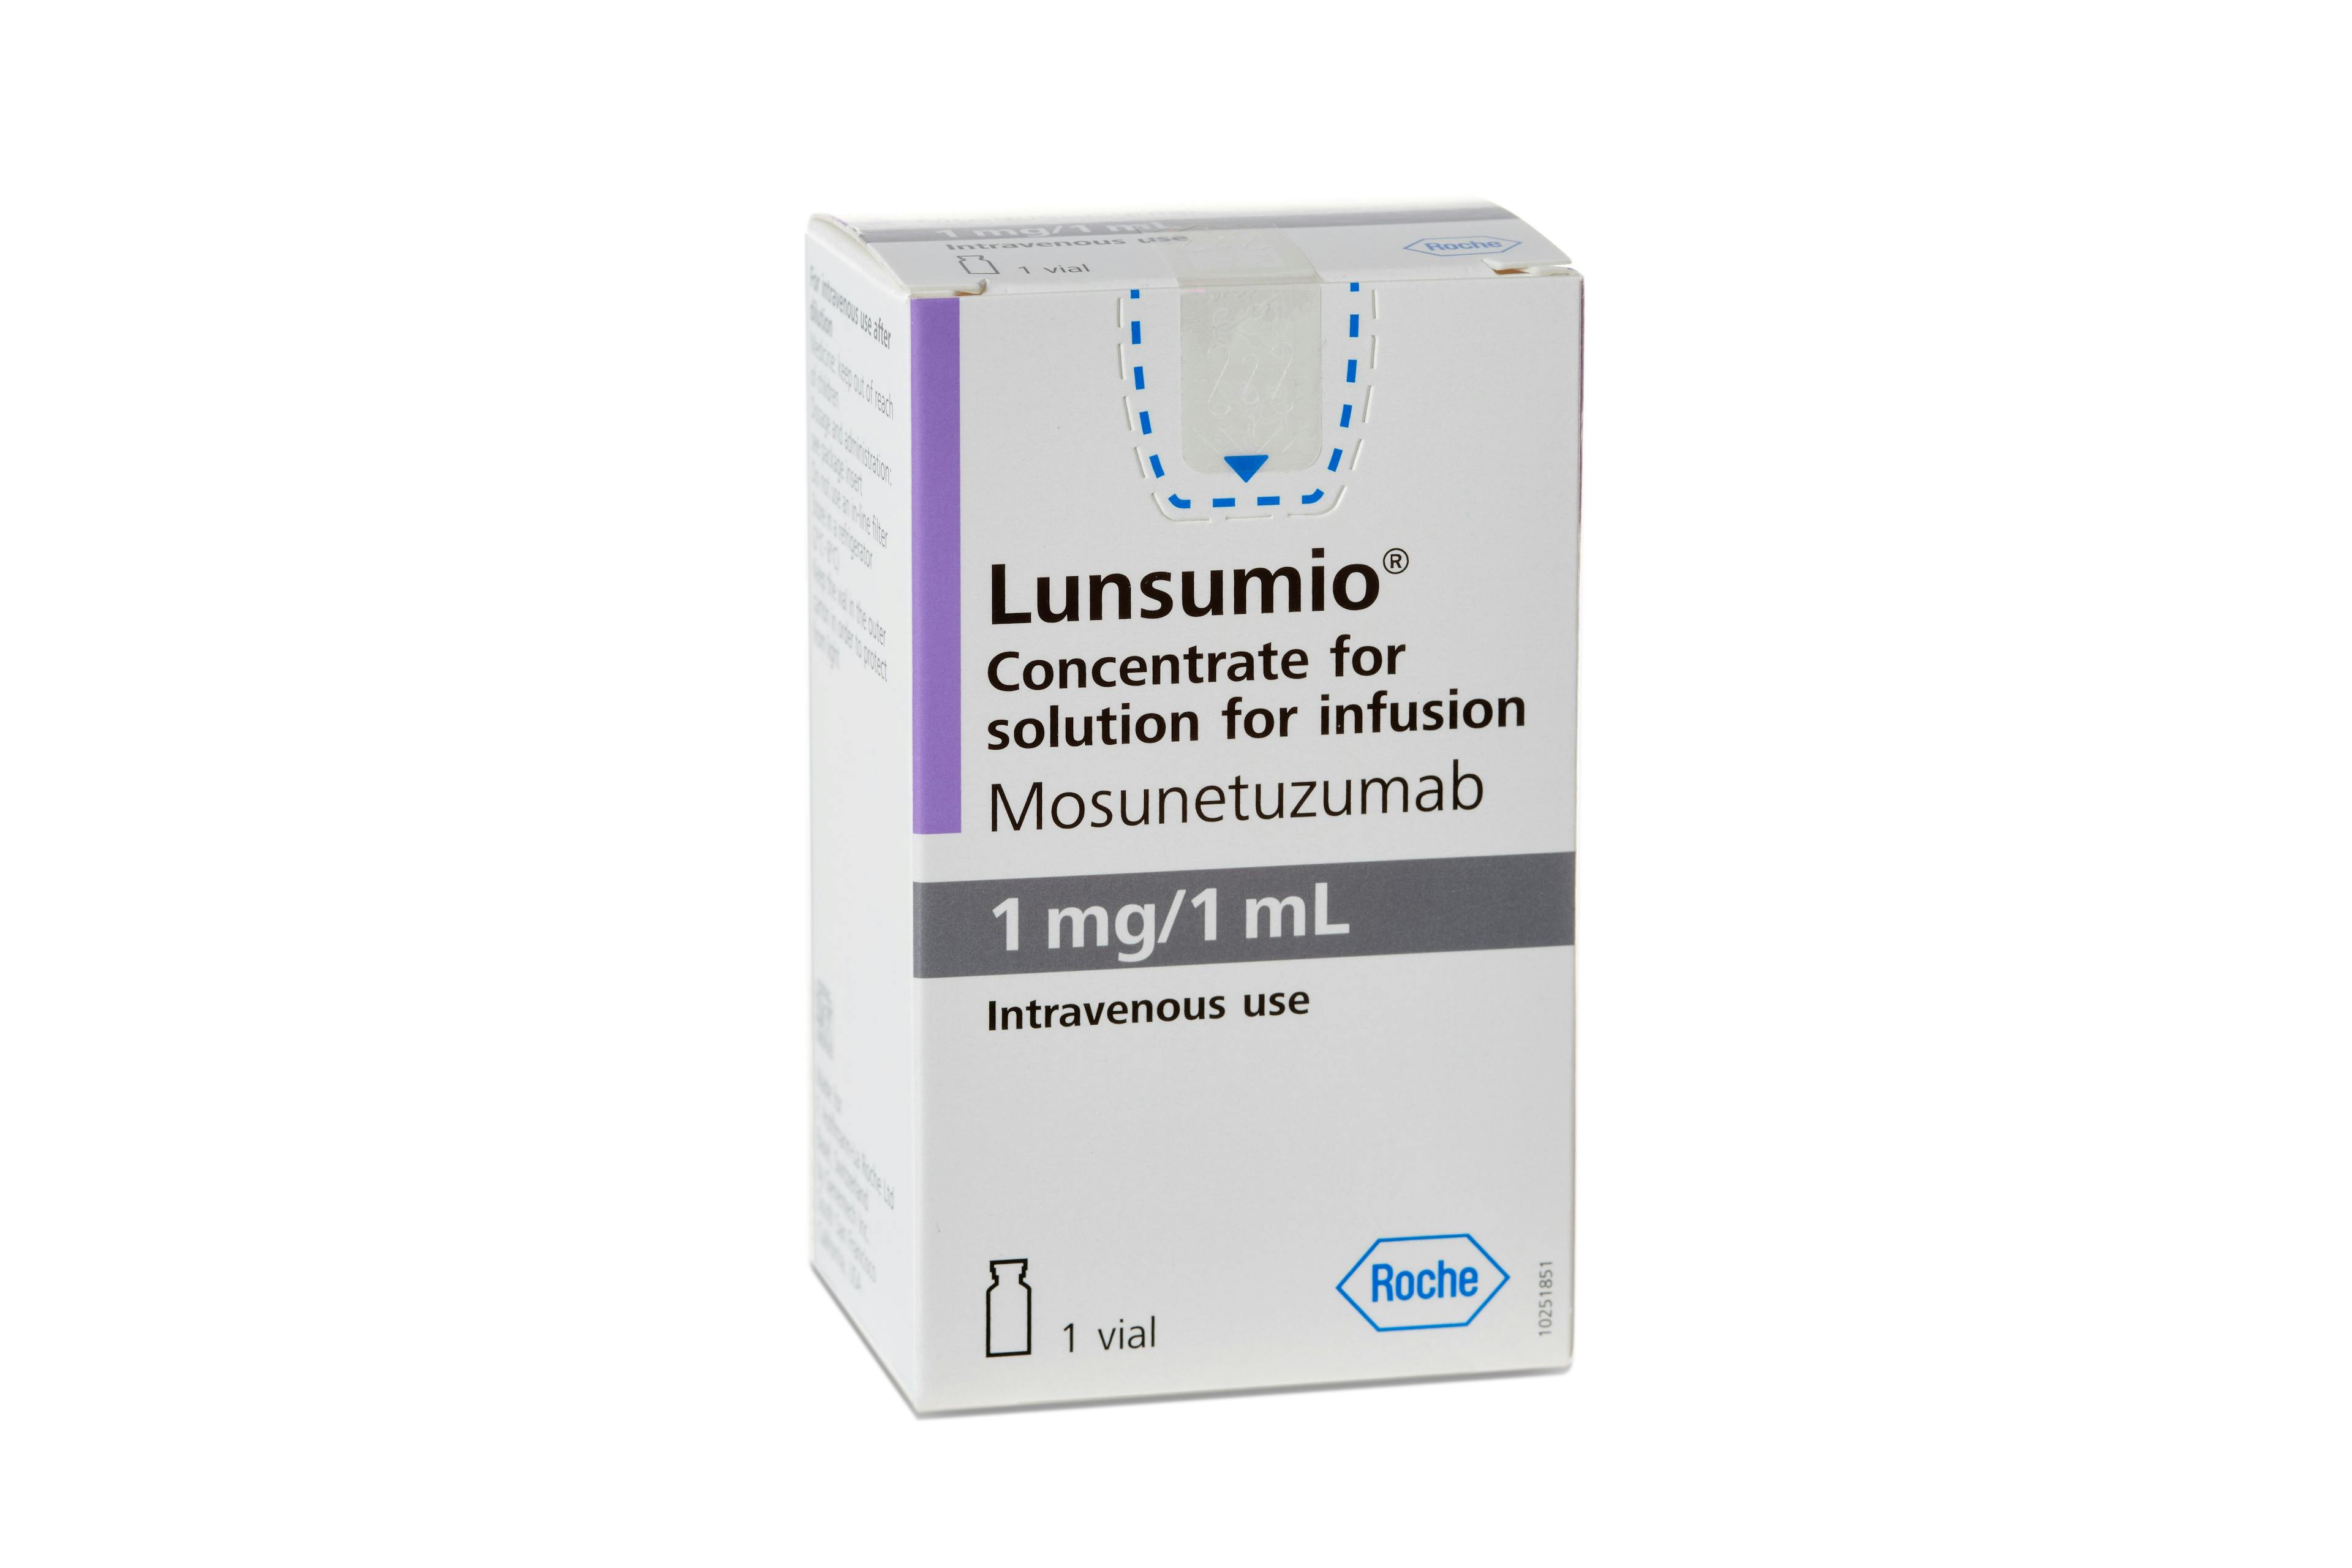 image of the box for lunsumio